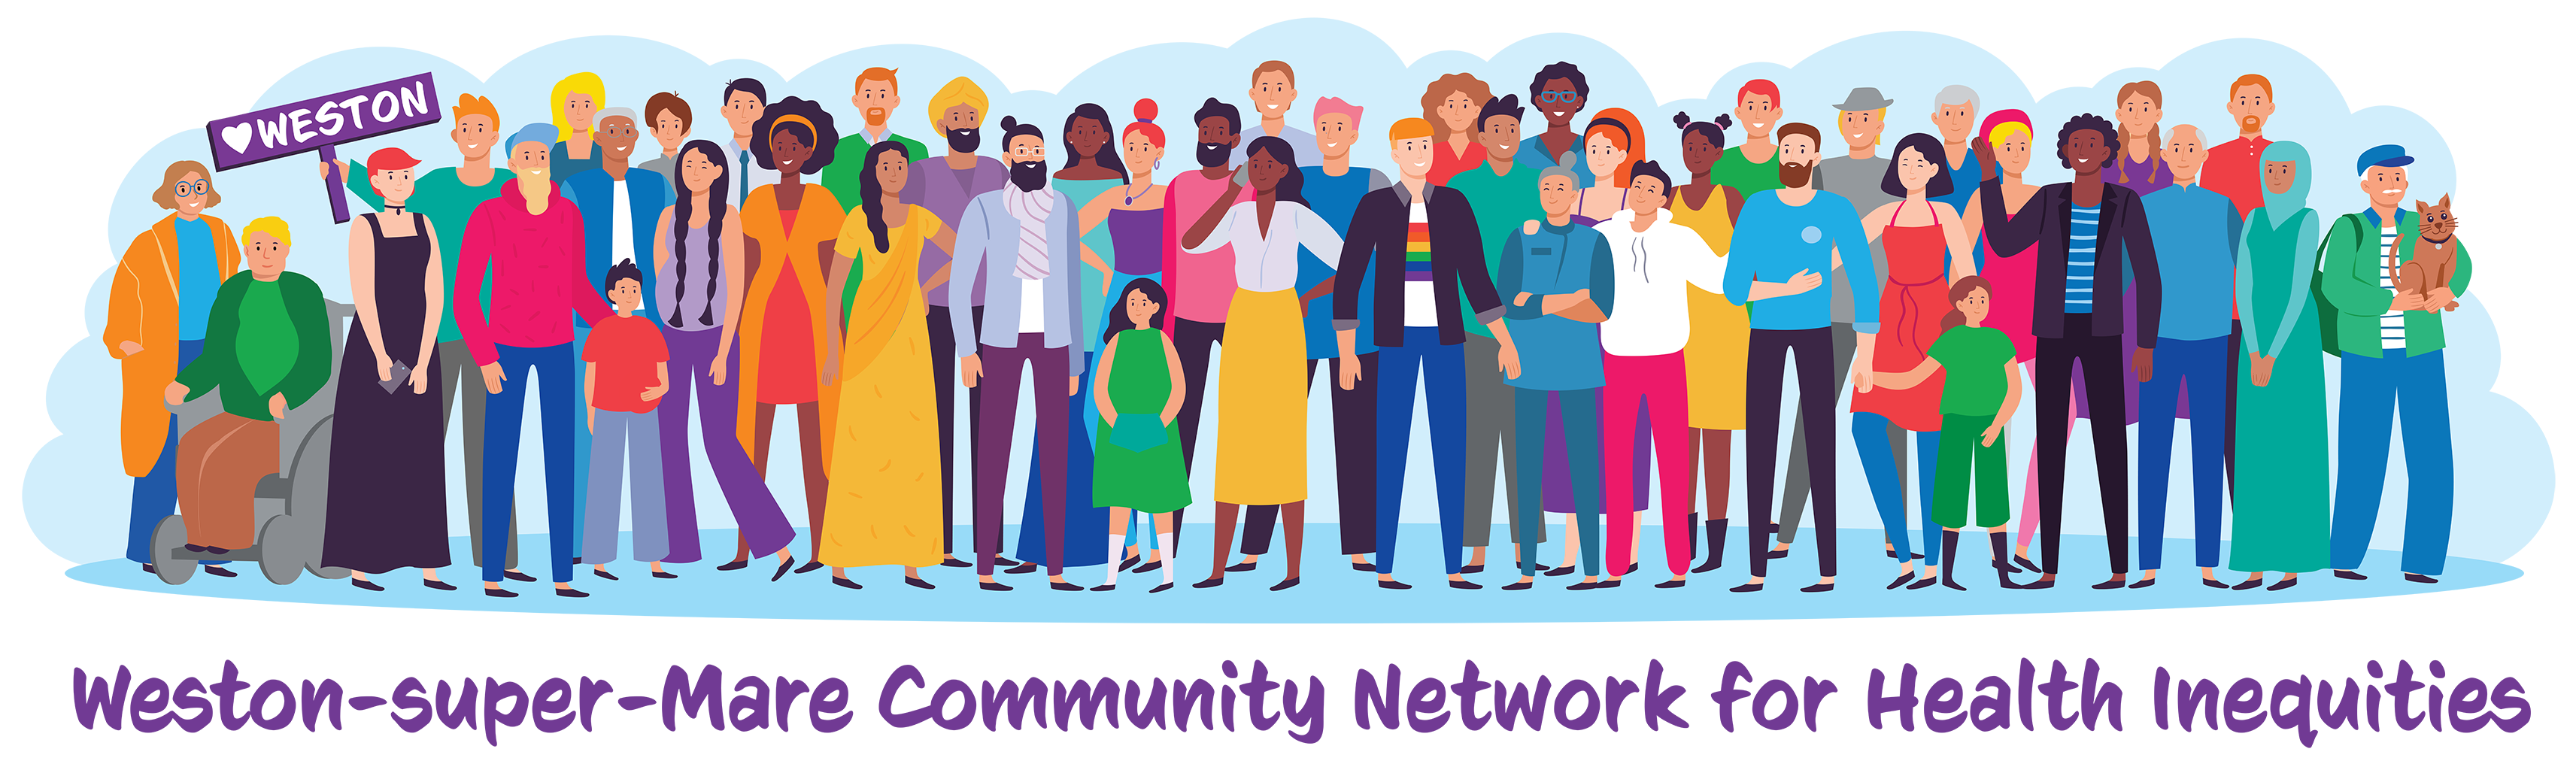 Colourful ullustration of a diverse group of people with text - Weston-super-Mare community network